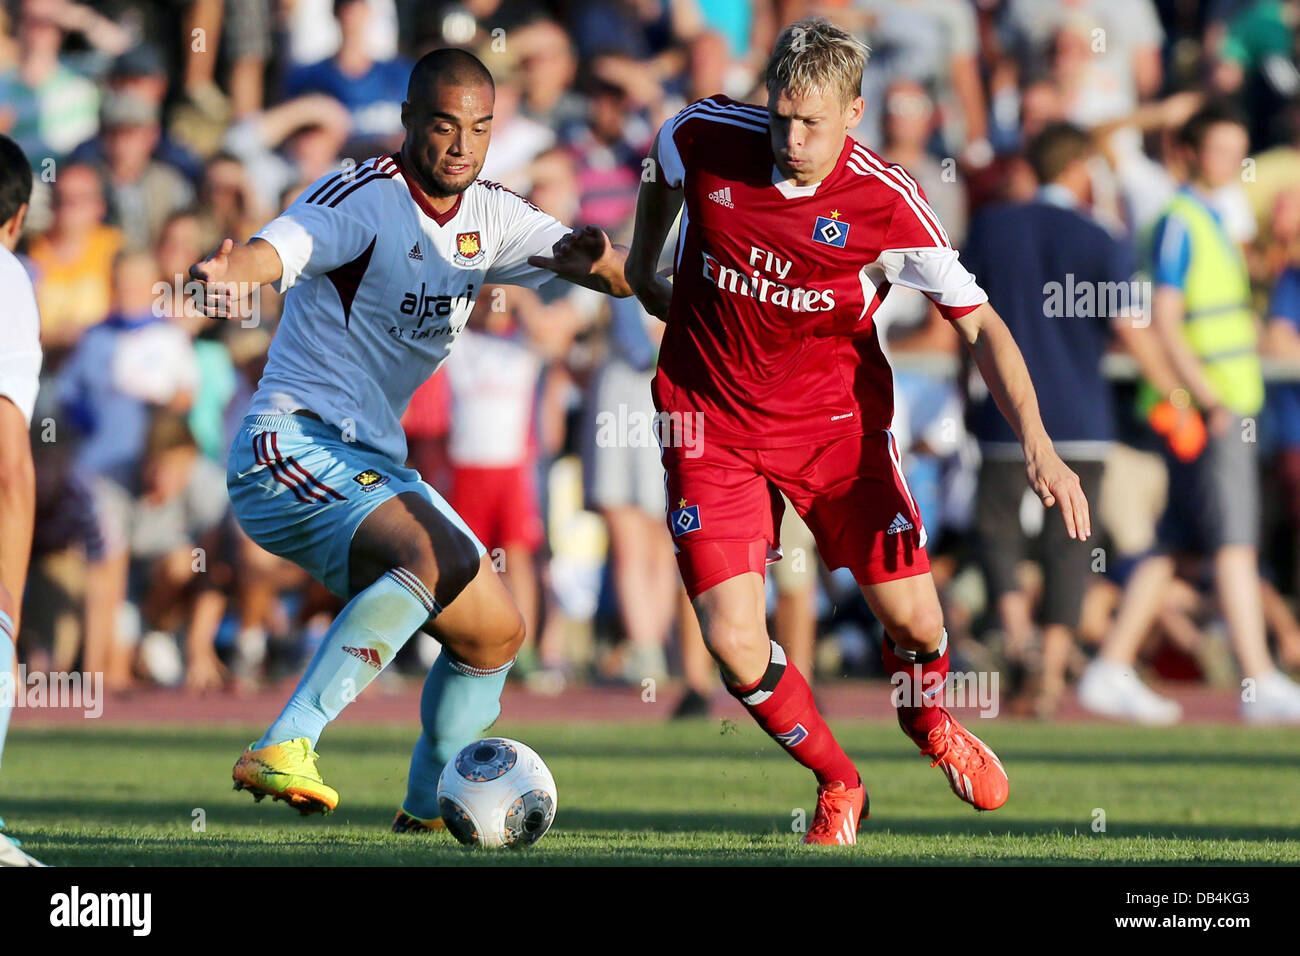 Flensburg, Germany. 23rd July, 2013. United's Winston Reid (L) vies for the ball with Hamburg's Artjoms Rudnevs during the soccer test match between Hamburger SV and West Ham United at Stadium Arndstrasse in Flensburg, Germany, 23 July 2013. Photo: Malte Christians/dpa/Alamy Live News Stock Photo